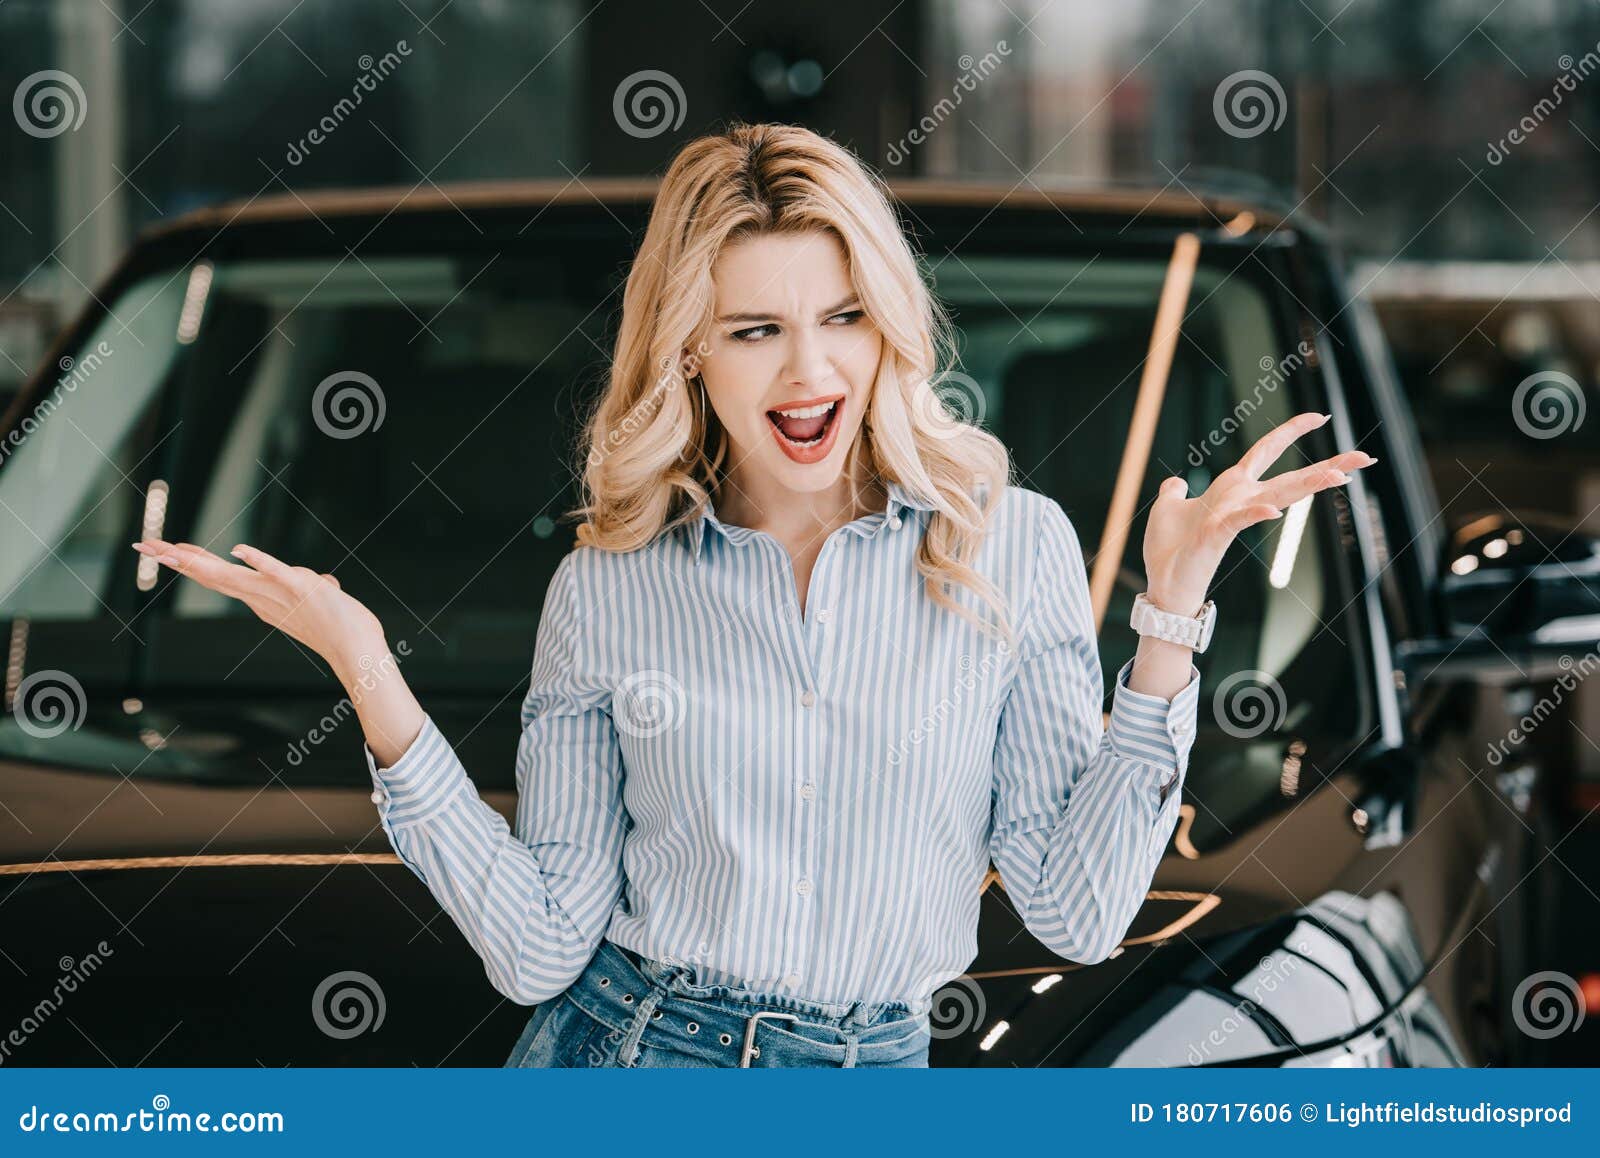 Attractive Blonde Woman Screaming and Gesturing Near Black Car. Stock ...